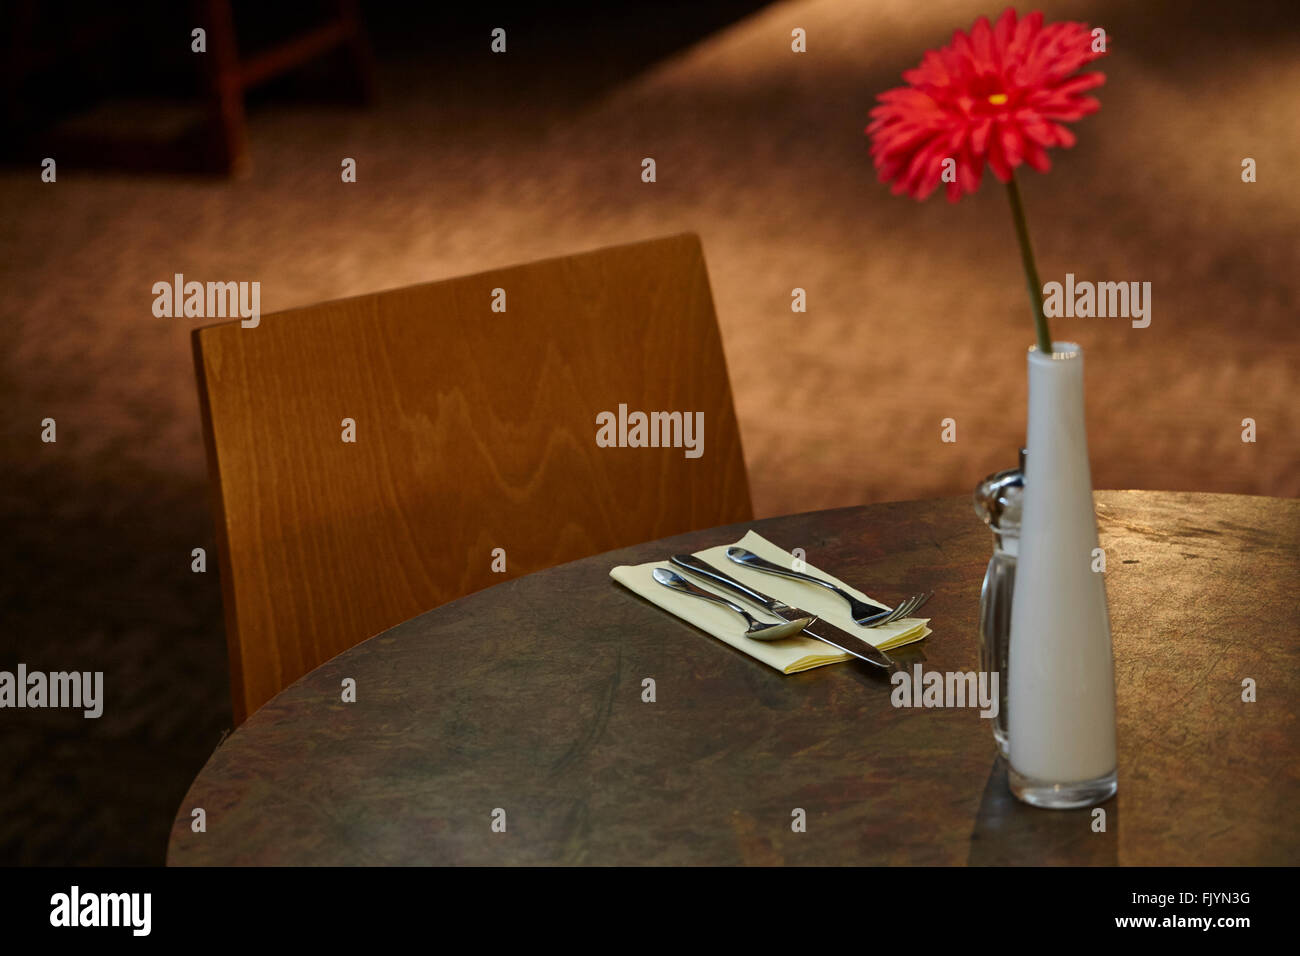 restaurant table with red flower Stock Photo